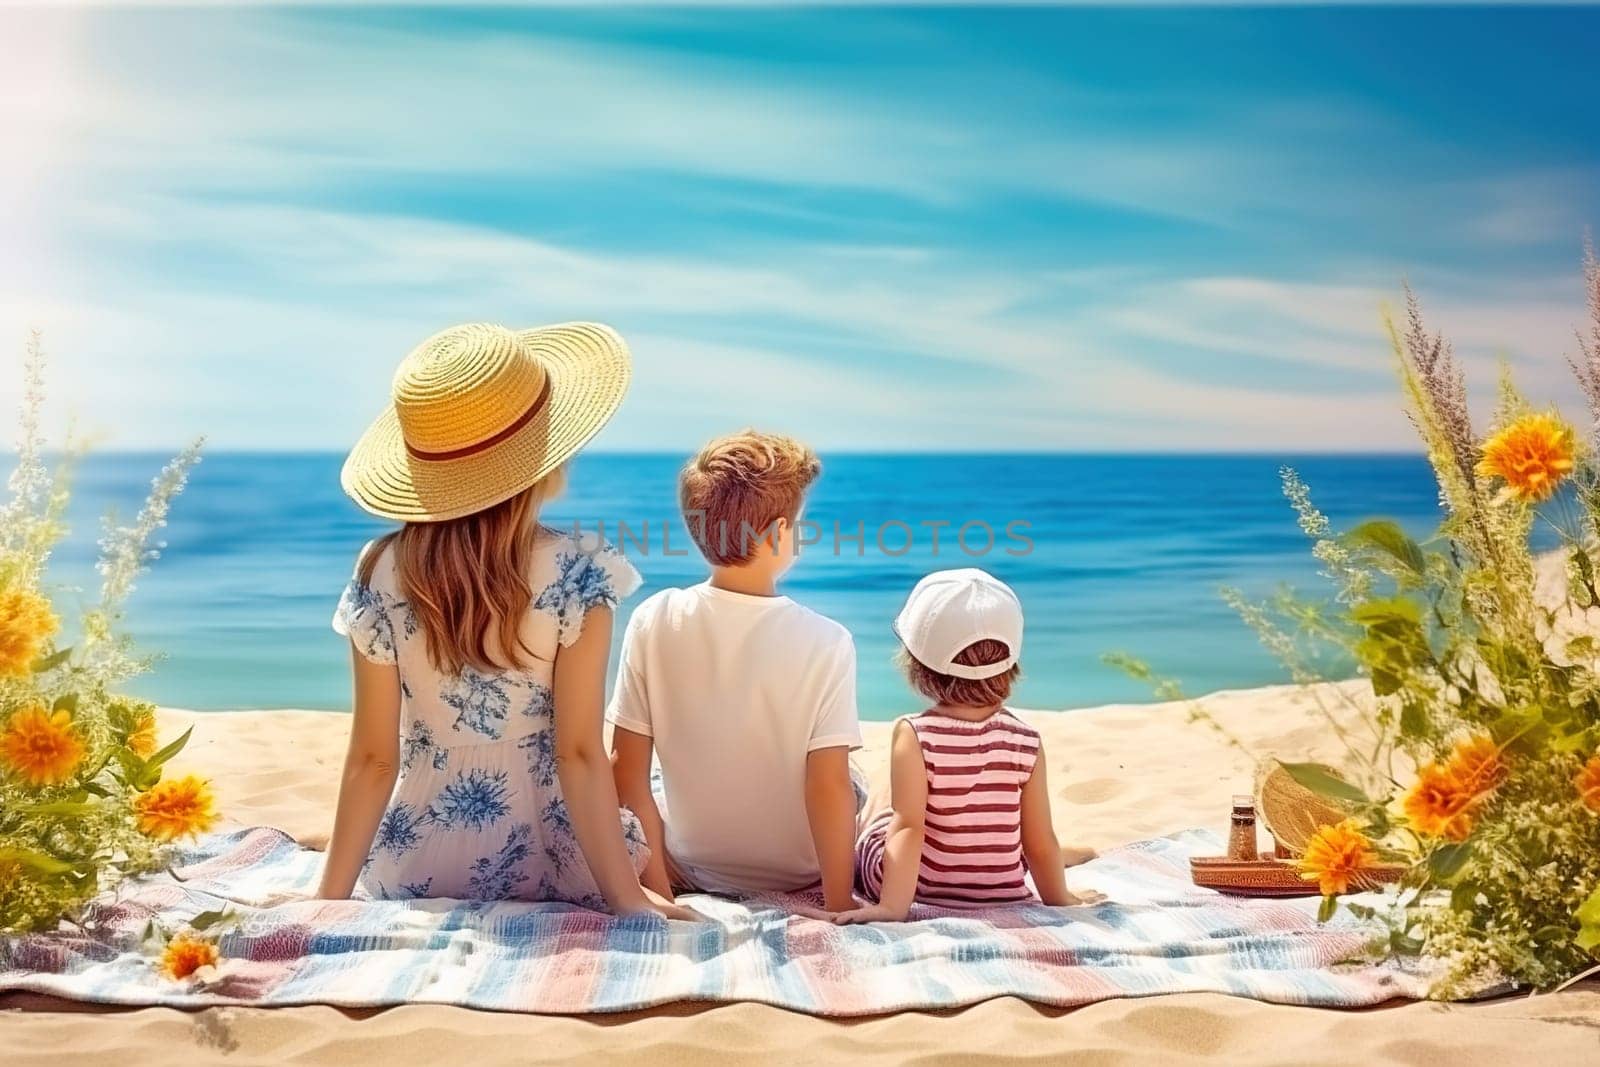 Children sitting by the sea on a picnic. High quality photo